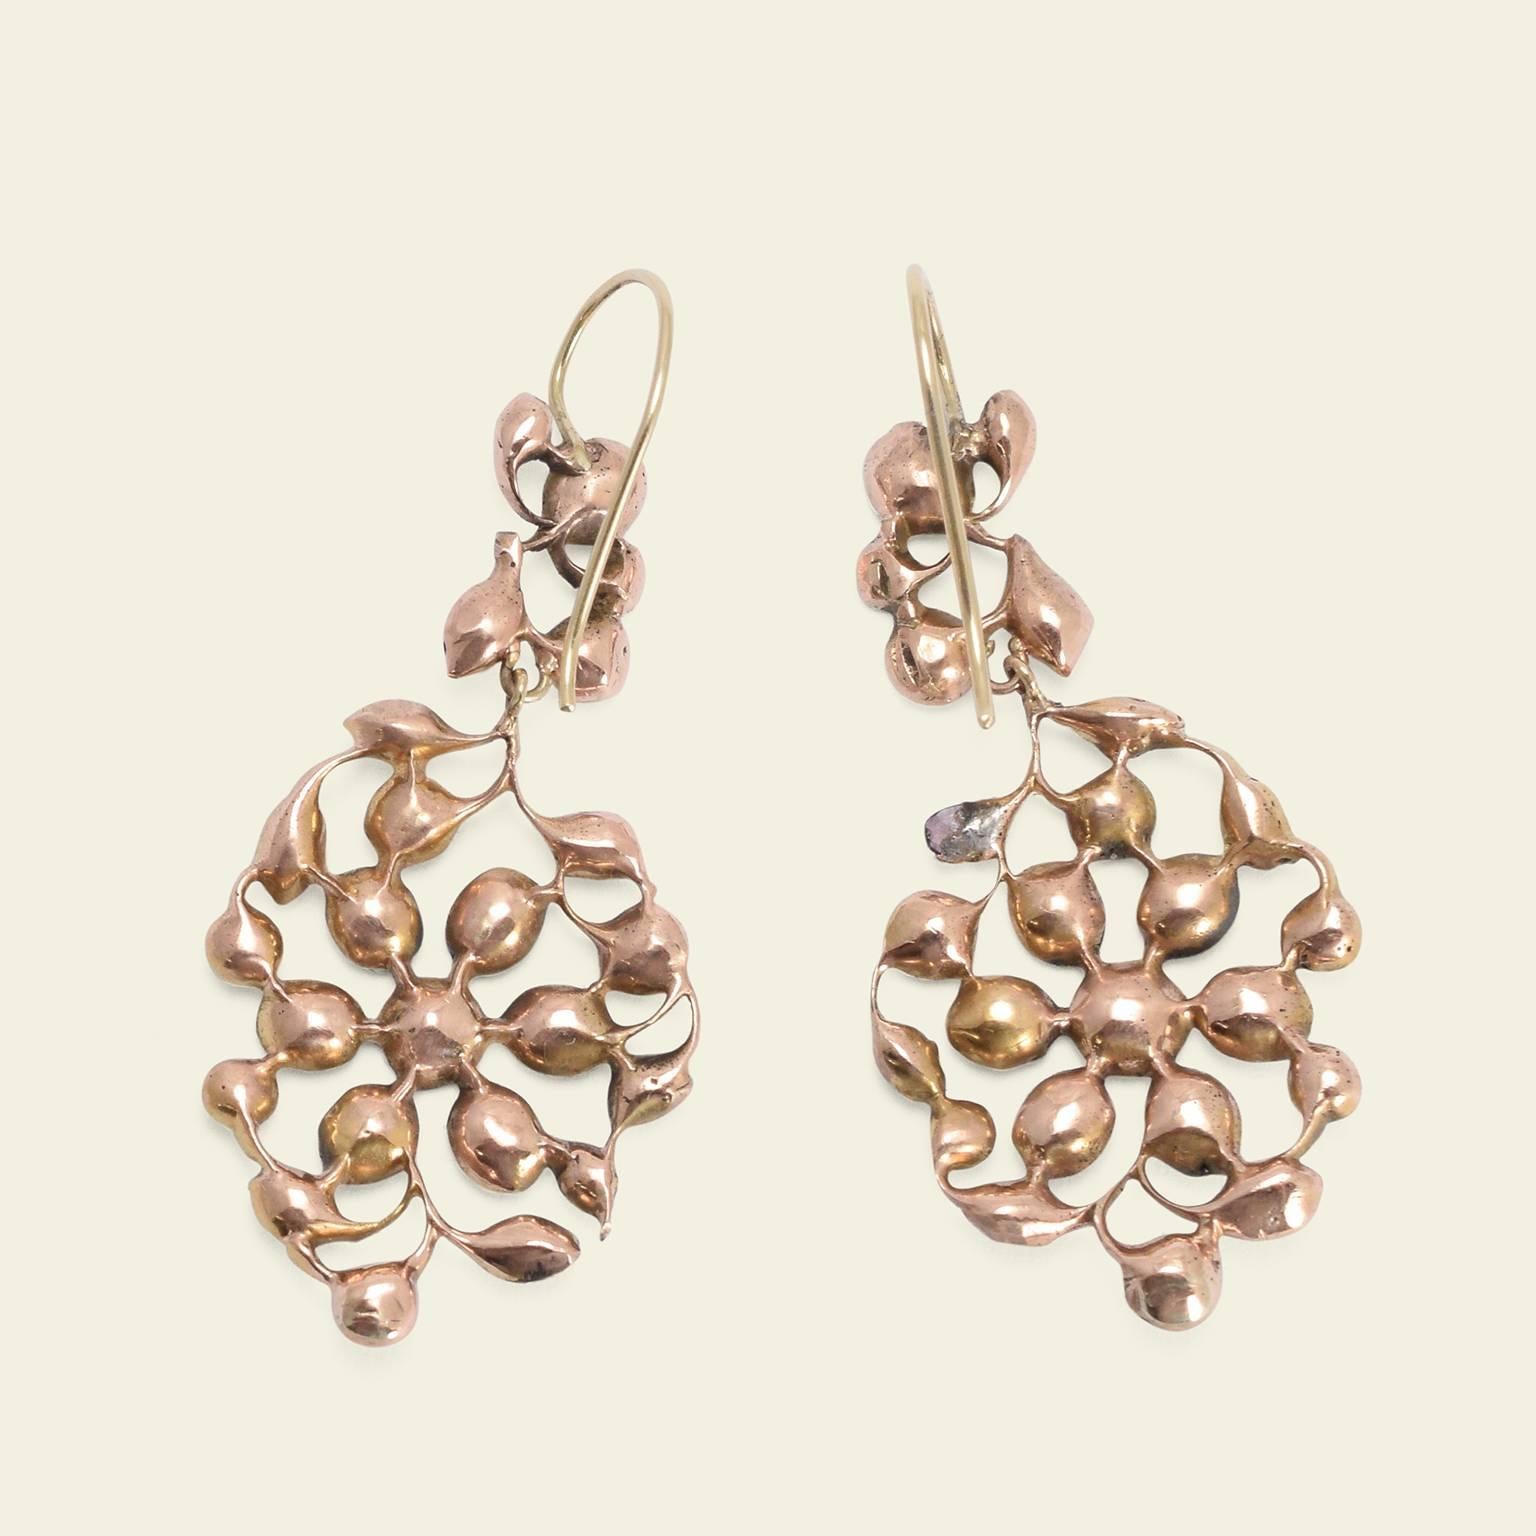 These Georgian earrings are modeled in 10k gold in a beautiful swirling floral motif. The exquisitely mirrored pendant drops are set with flat cut foil-backed garnets of a lovely purplish red hue.

Materials: 10k gold (tests), foil-backed flat cut